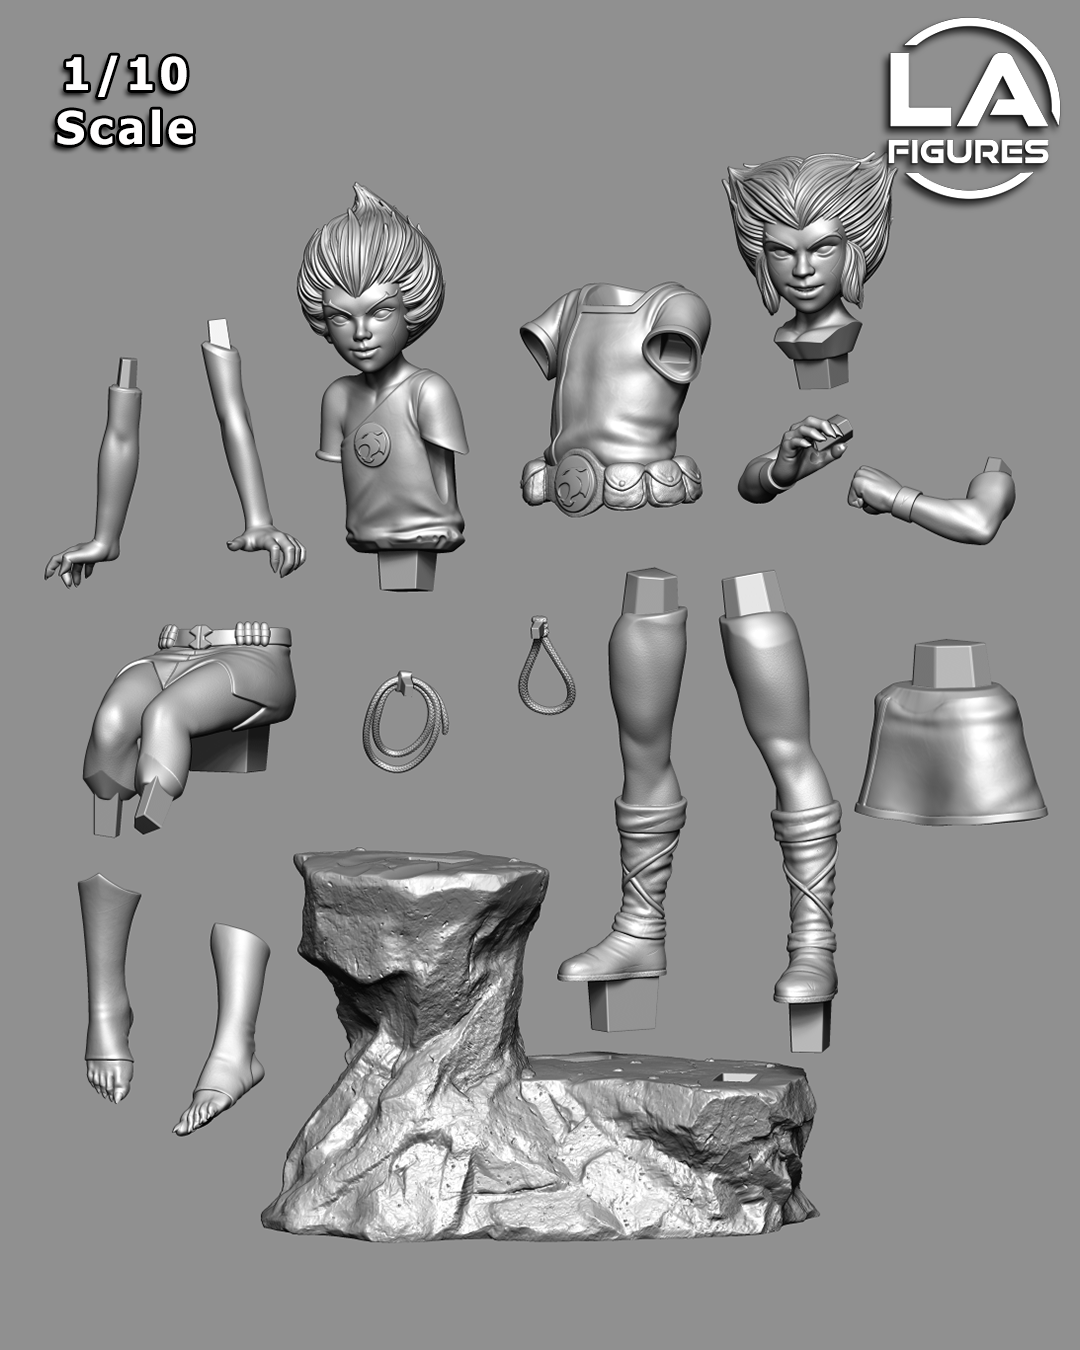 Willy Kit & Willy Kat (Thundercats) Statue - 184mm - 3D Print Fan Art